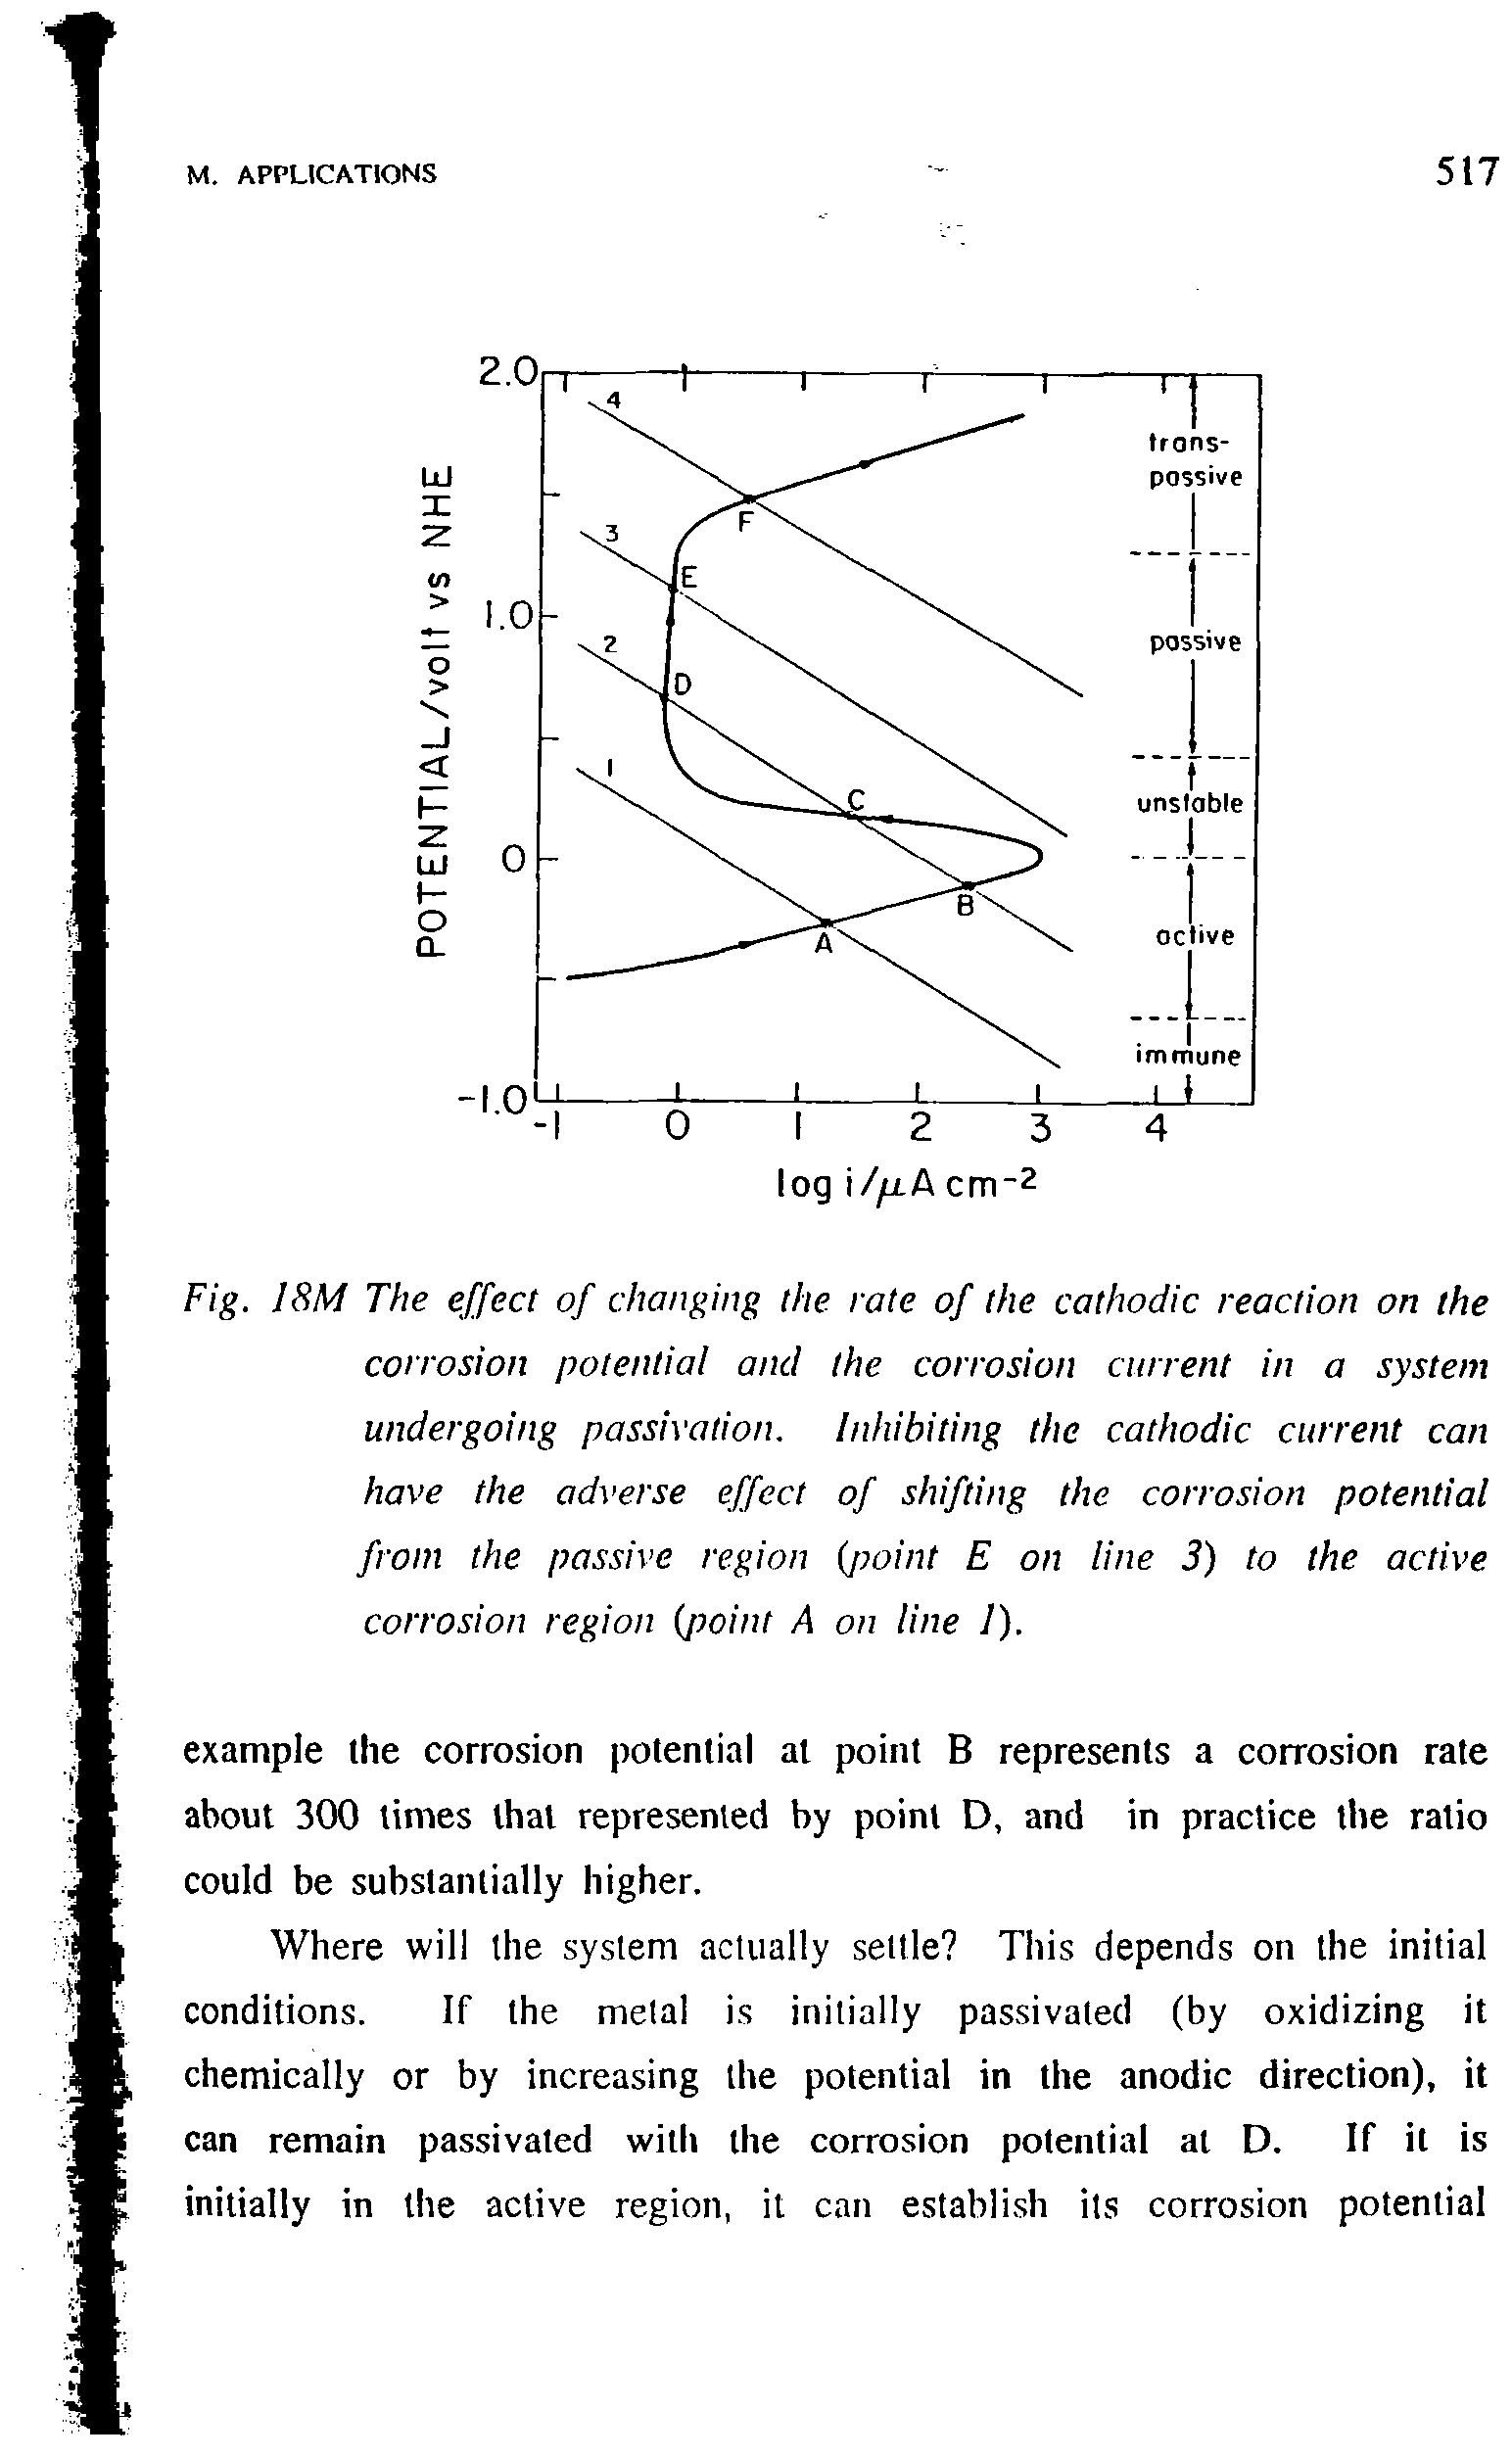 Fig. ISM The effect of changing the rate of the cathodic reaction on the corrosion potential and the corrosion current in a system undergoing passivation. Inhibiting the cathodic current can have the adverse effect of shifting the corrosion potential from the passive region (point E on line 3) to the active corrosion region (jtoint A on line I).